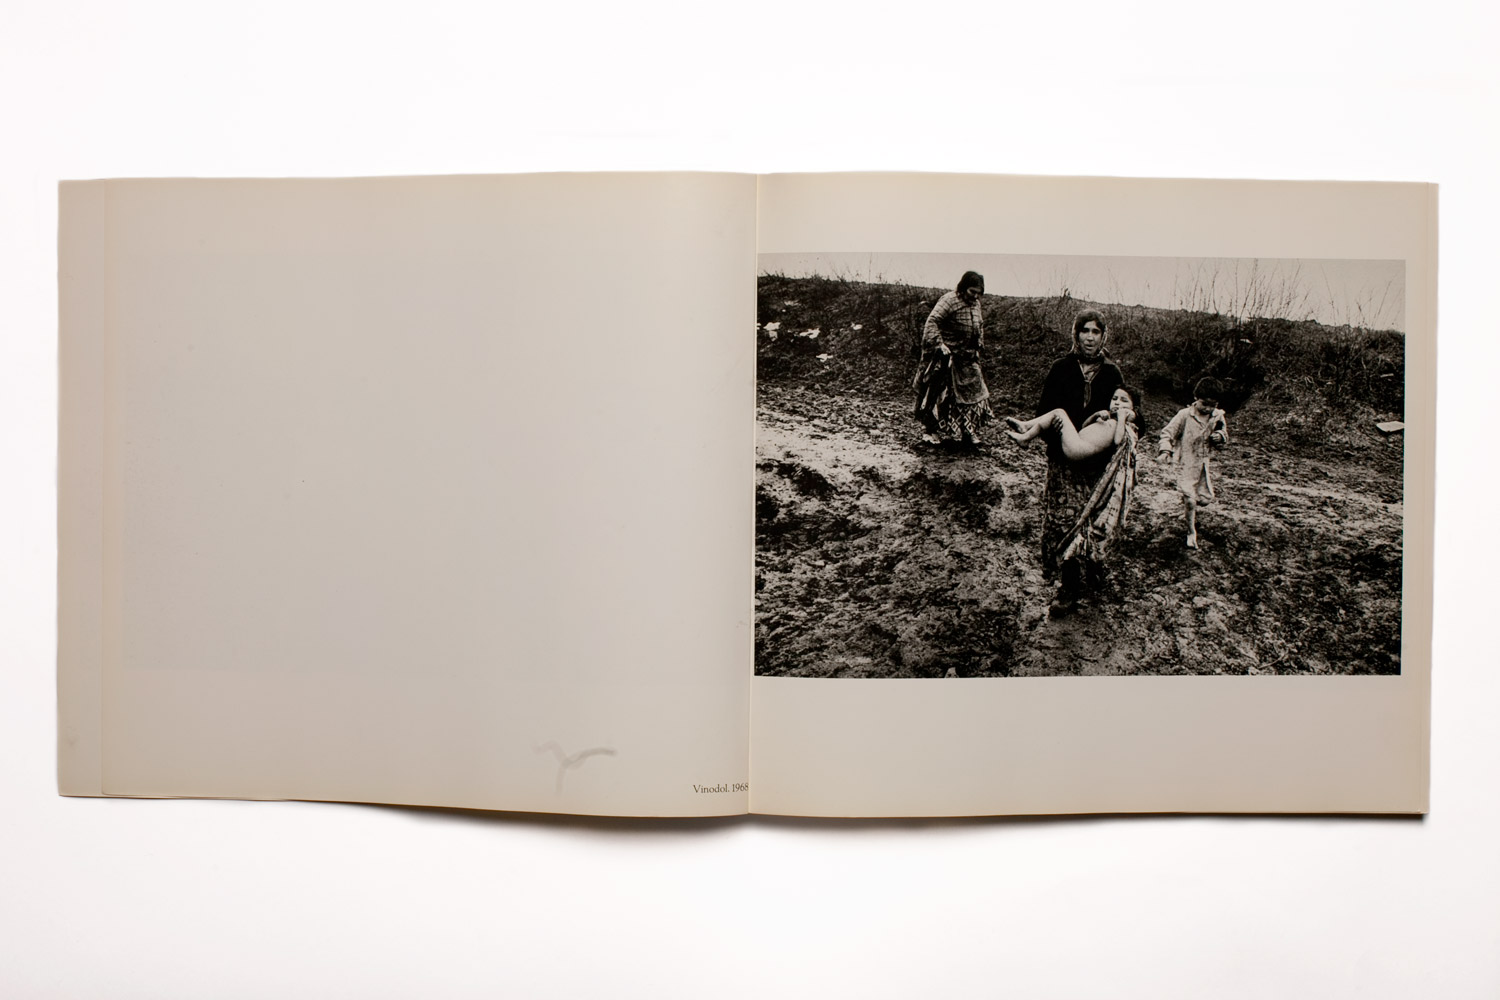 The design of the 1975 edition of Gypsies was very traditional in photobook terms.